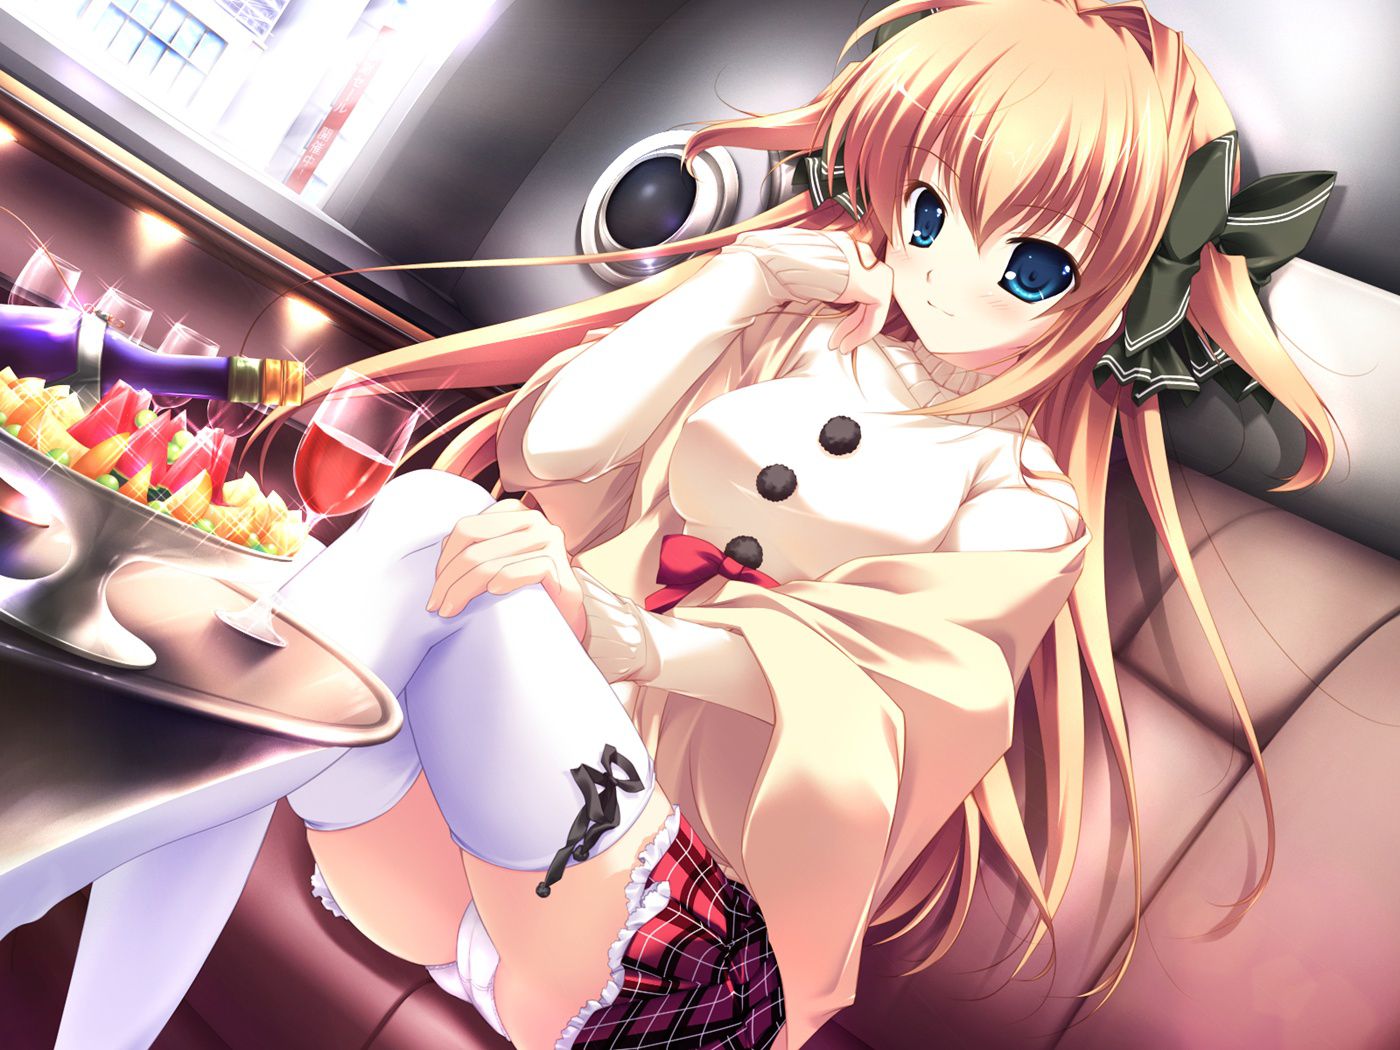 Nanairo routes [18 PC Bishoujo game CG] erotic wallpapers and pictures part 1 7